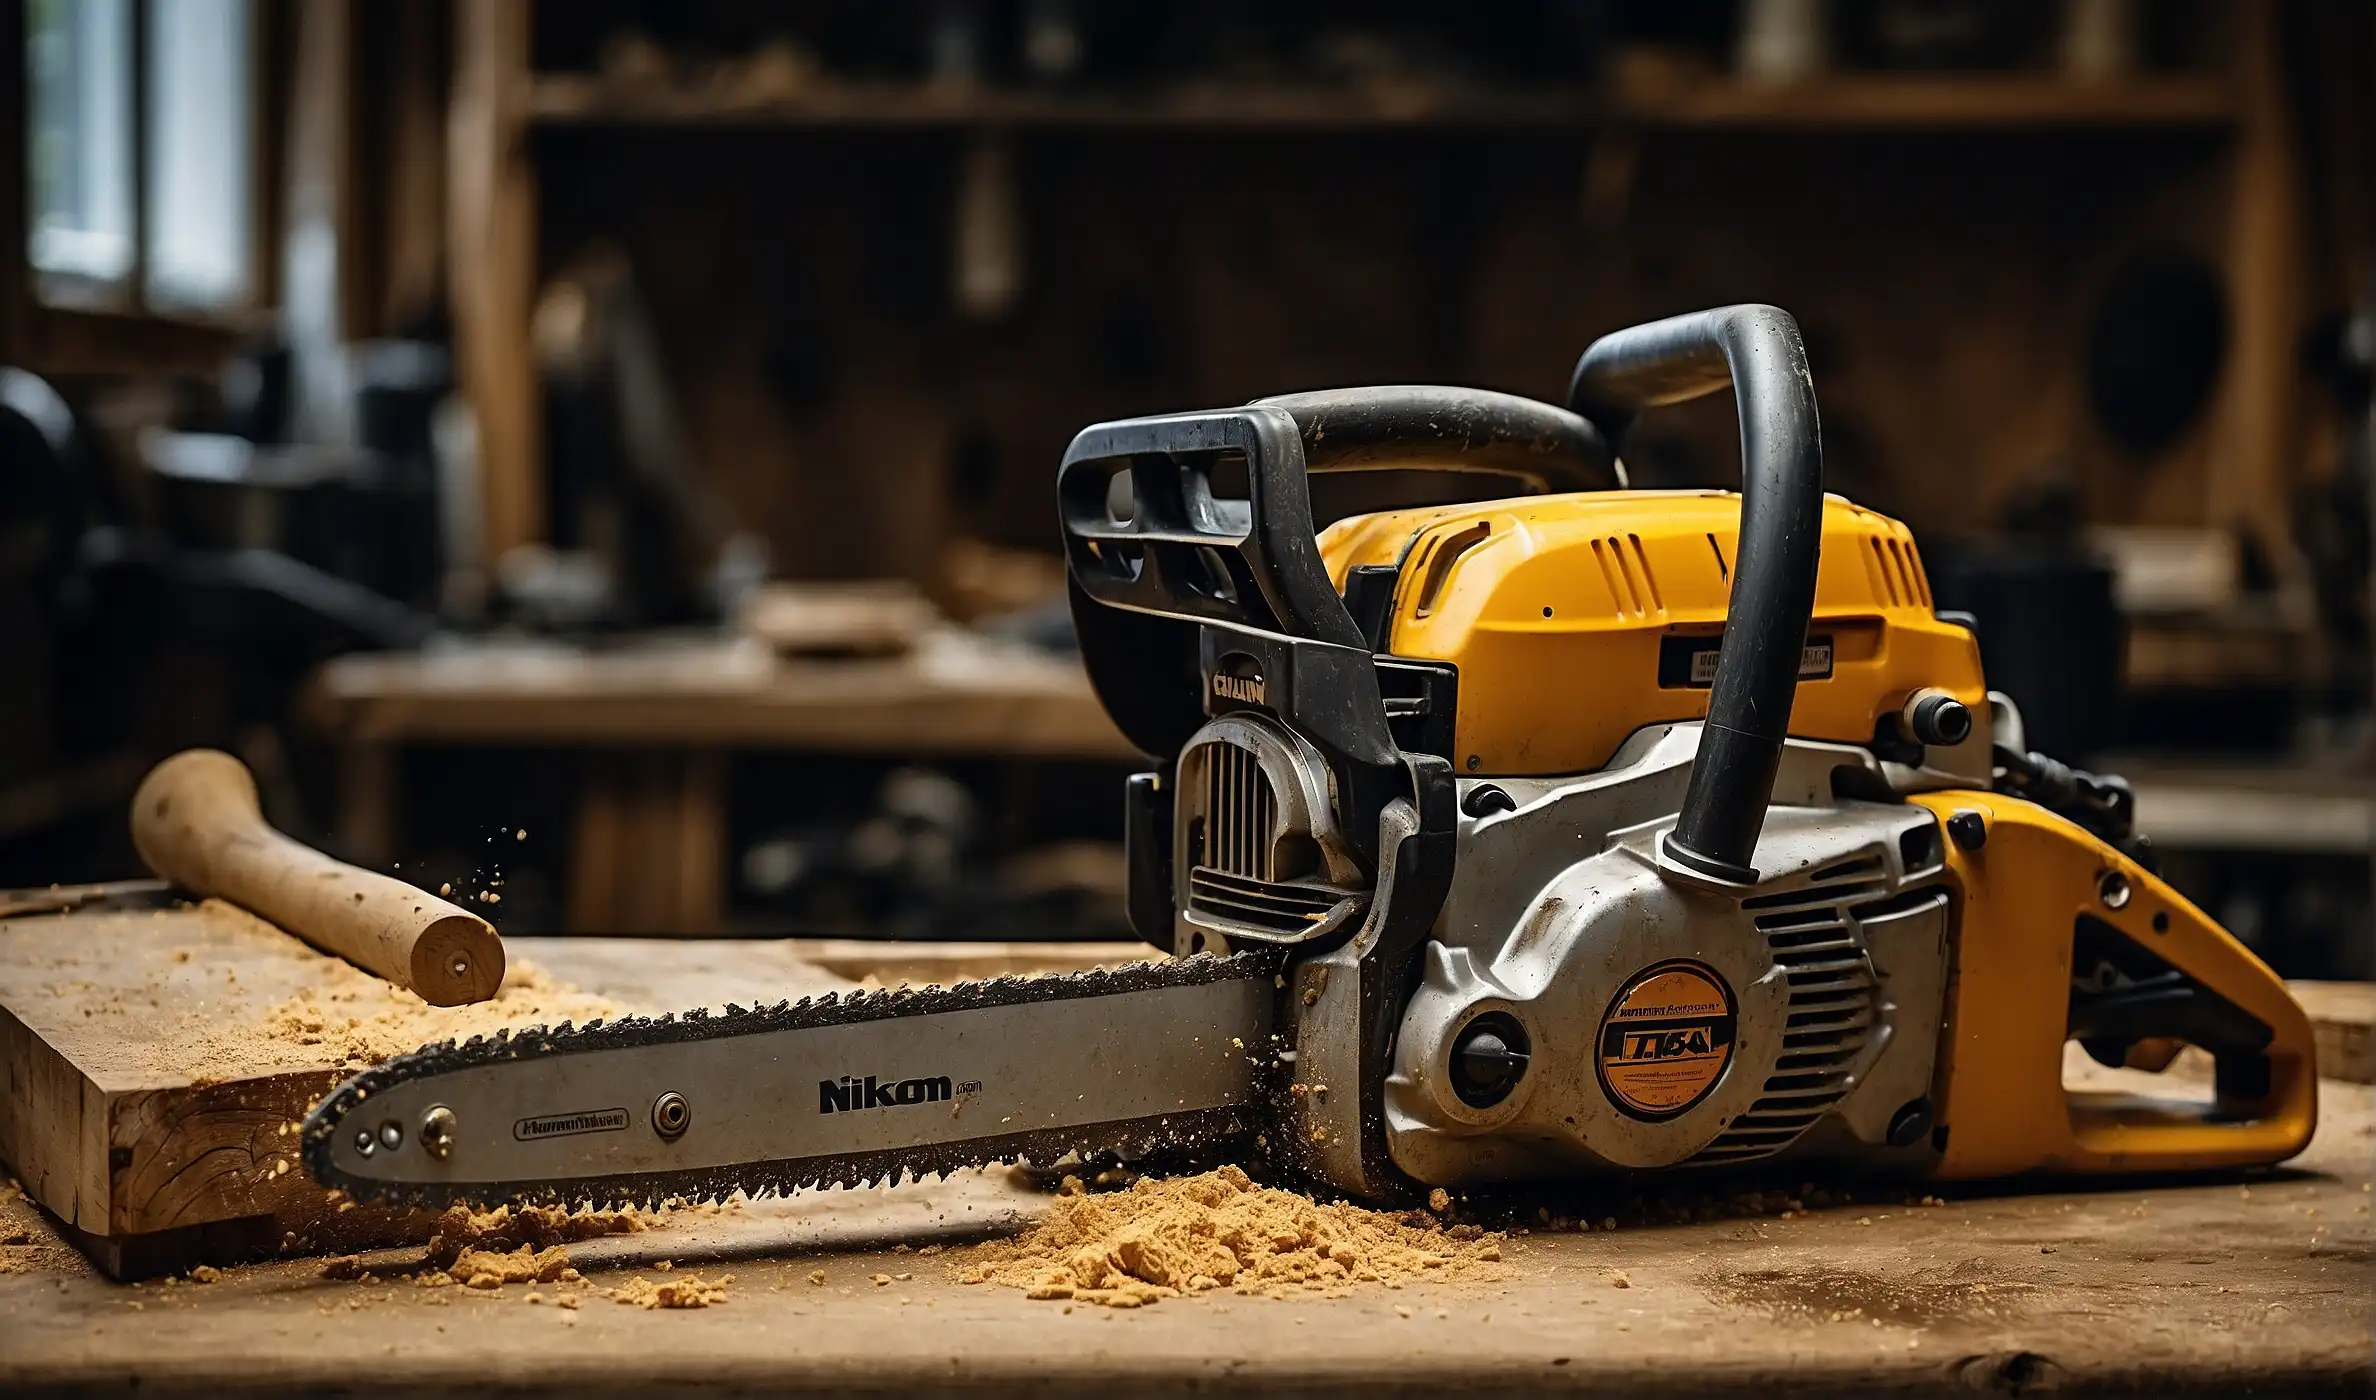 Chainsaw vs Reciprocating Saw: Understanding Differences